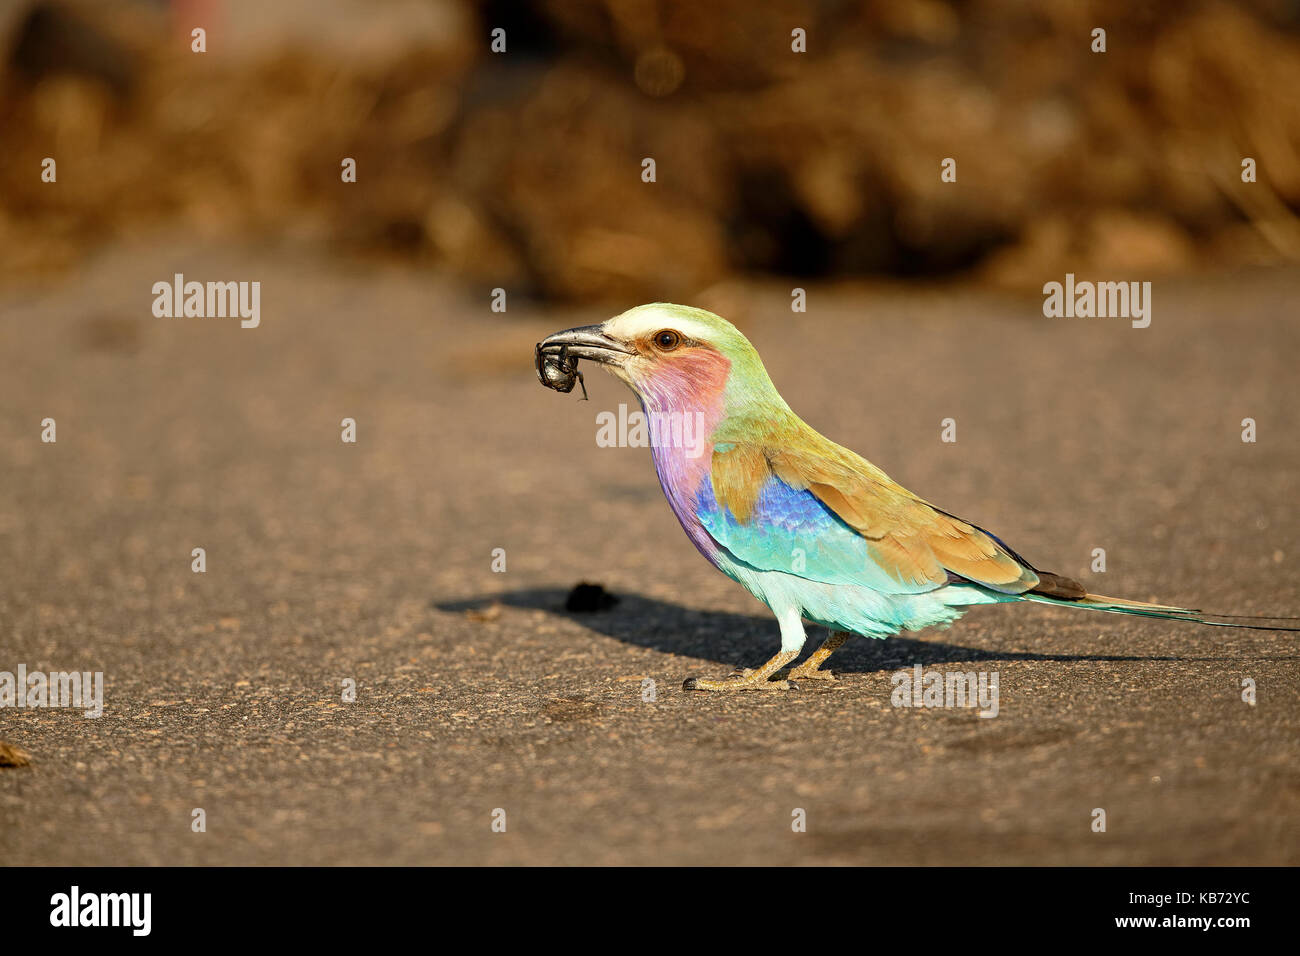 Lilac-breasted Roller (Coracias caudata), adult sitting on the ground and feeding on a Dung Beetle (Scarabaeidae), South Africa, Mpumalanga, Kruger National Park Stock Photo